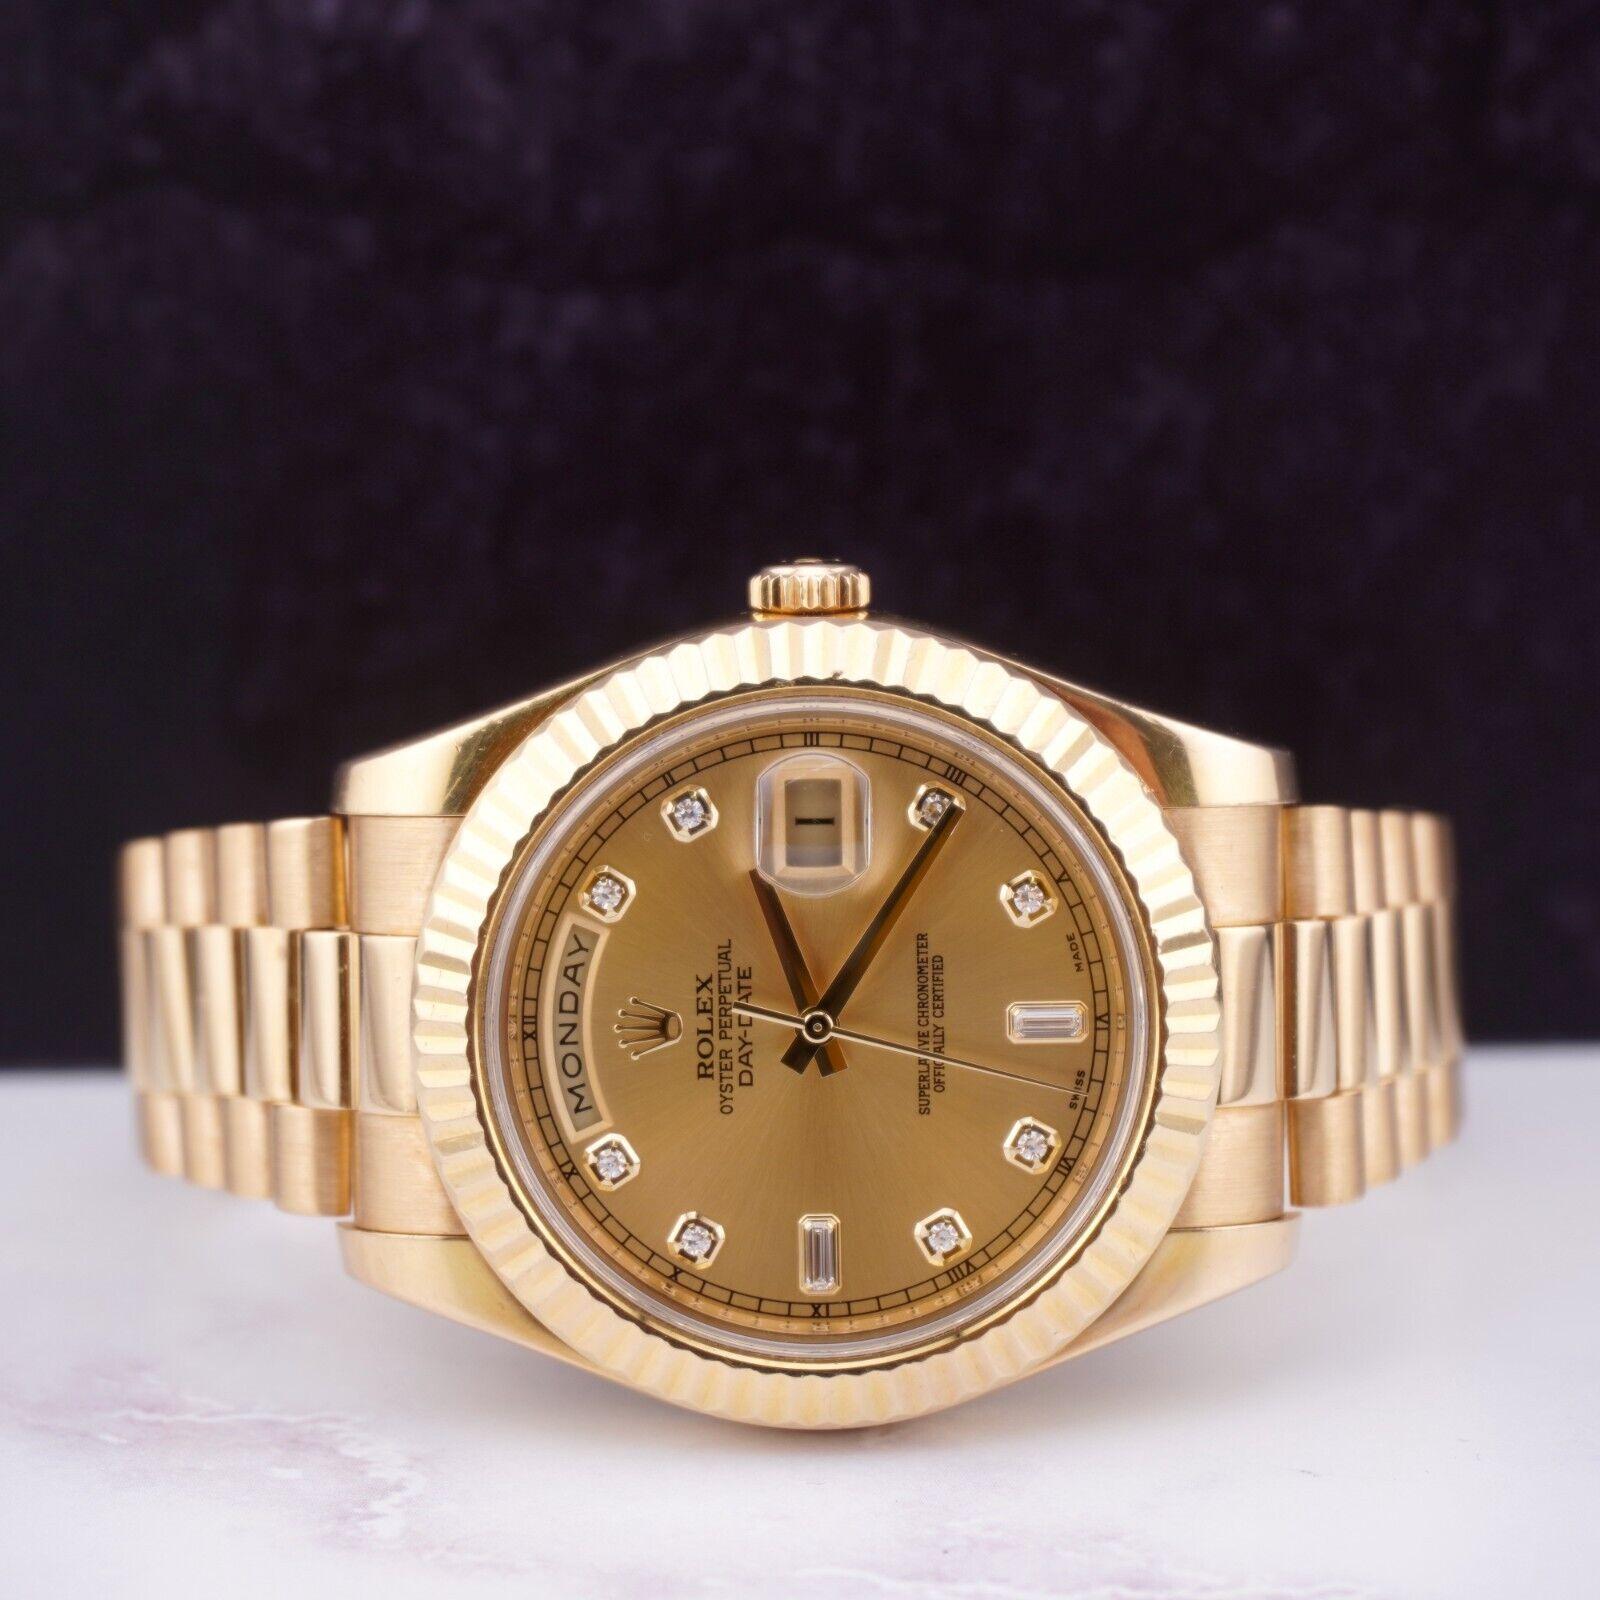 Rolex Daydate 40mm Watch

Pre-owned w/ Original Box & Card
100% Authentic Authenticity Card
Condition - (Excellent Condition) - See Pics
Watch Reference - 218238
Model - Day-Date
Dial Color - Gold
Material - 18k Yellow Gold
Watch Will Fit Wrist Size